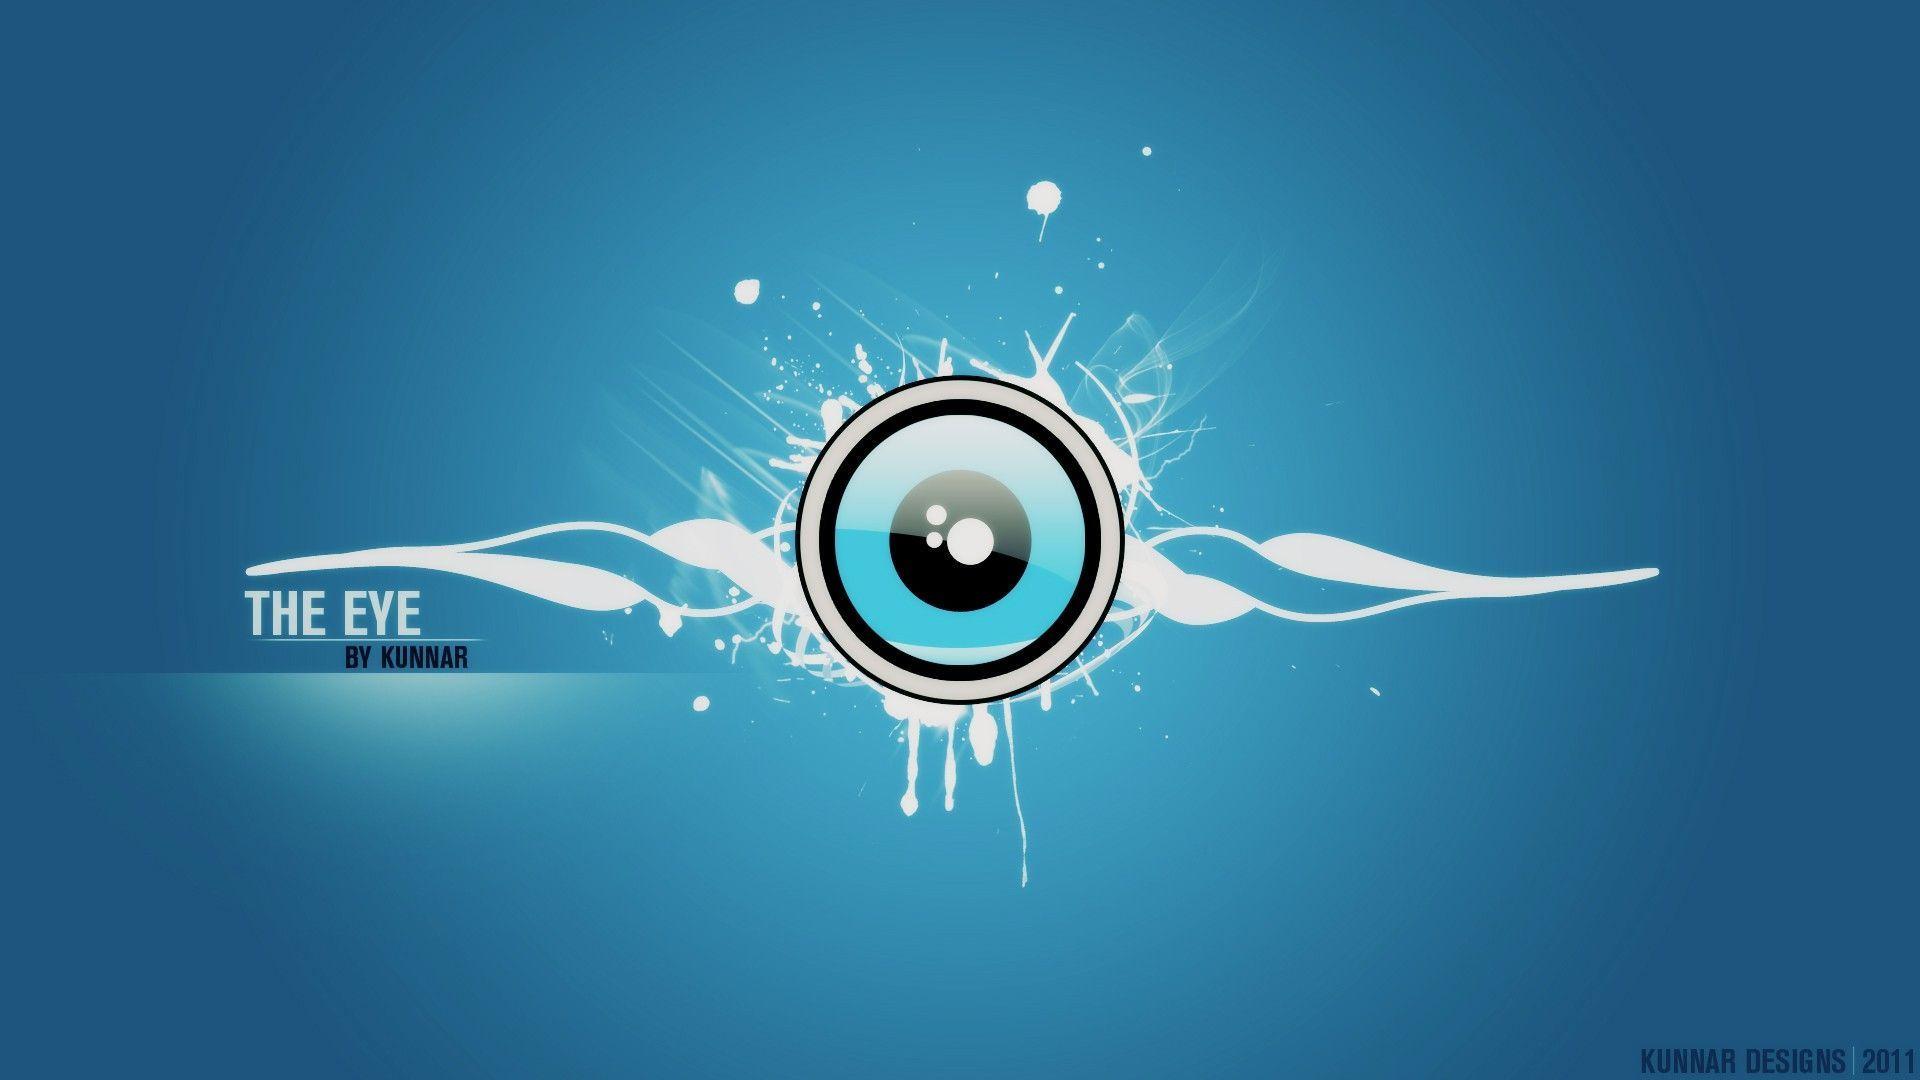 The Image of The Eye 3D 1920x1080 HD Wallpaper